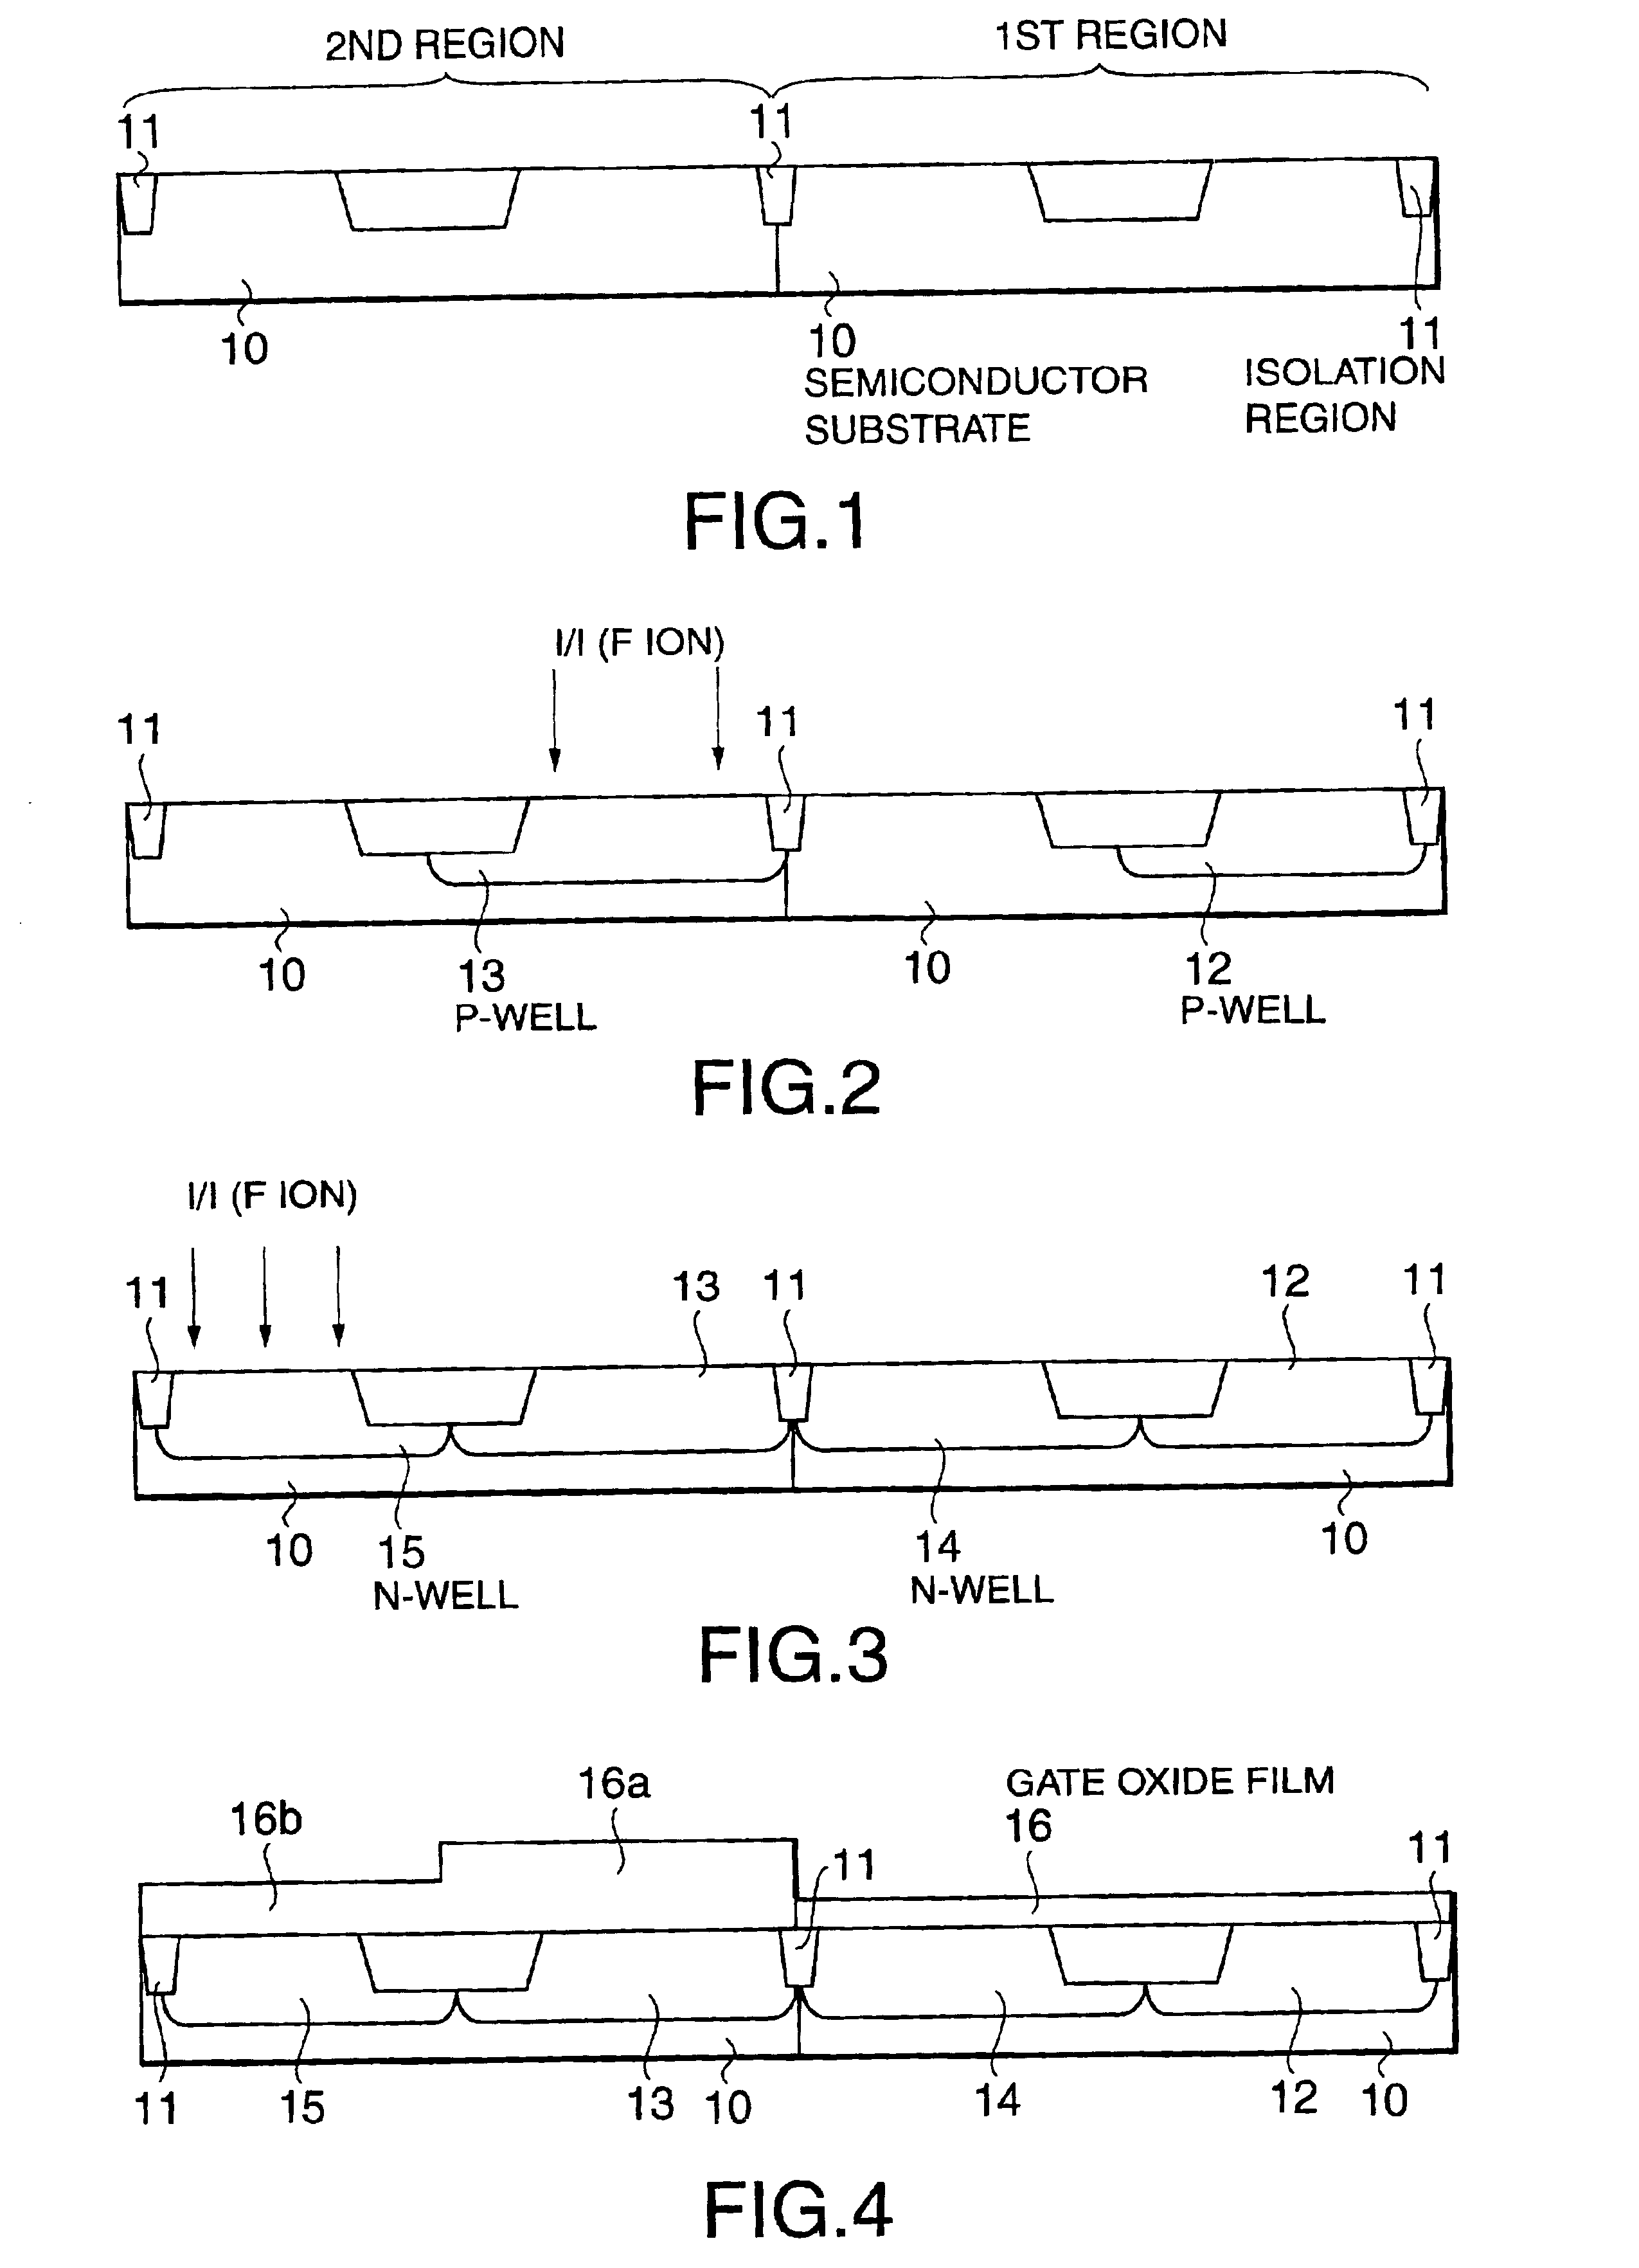 Fabrication of low power CMOS device with high reliability